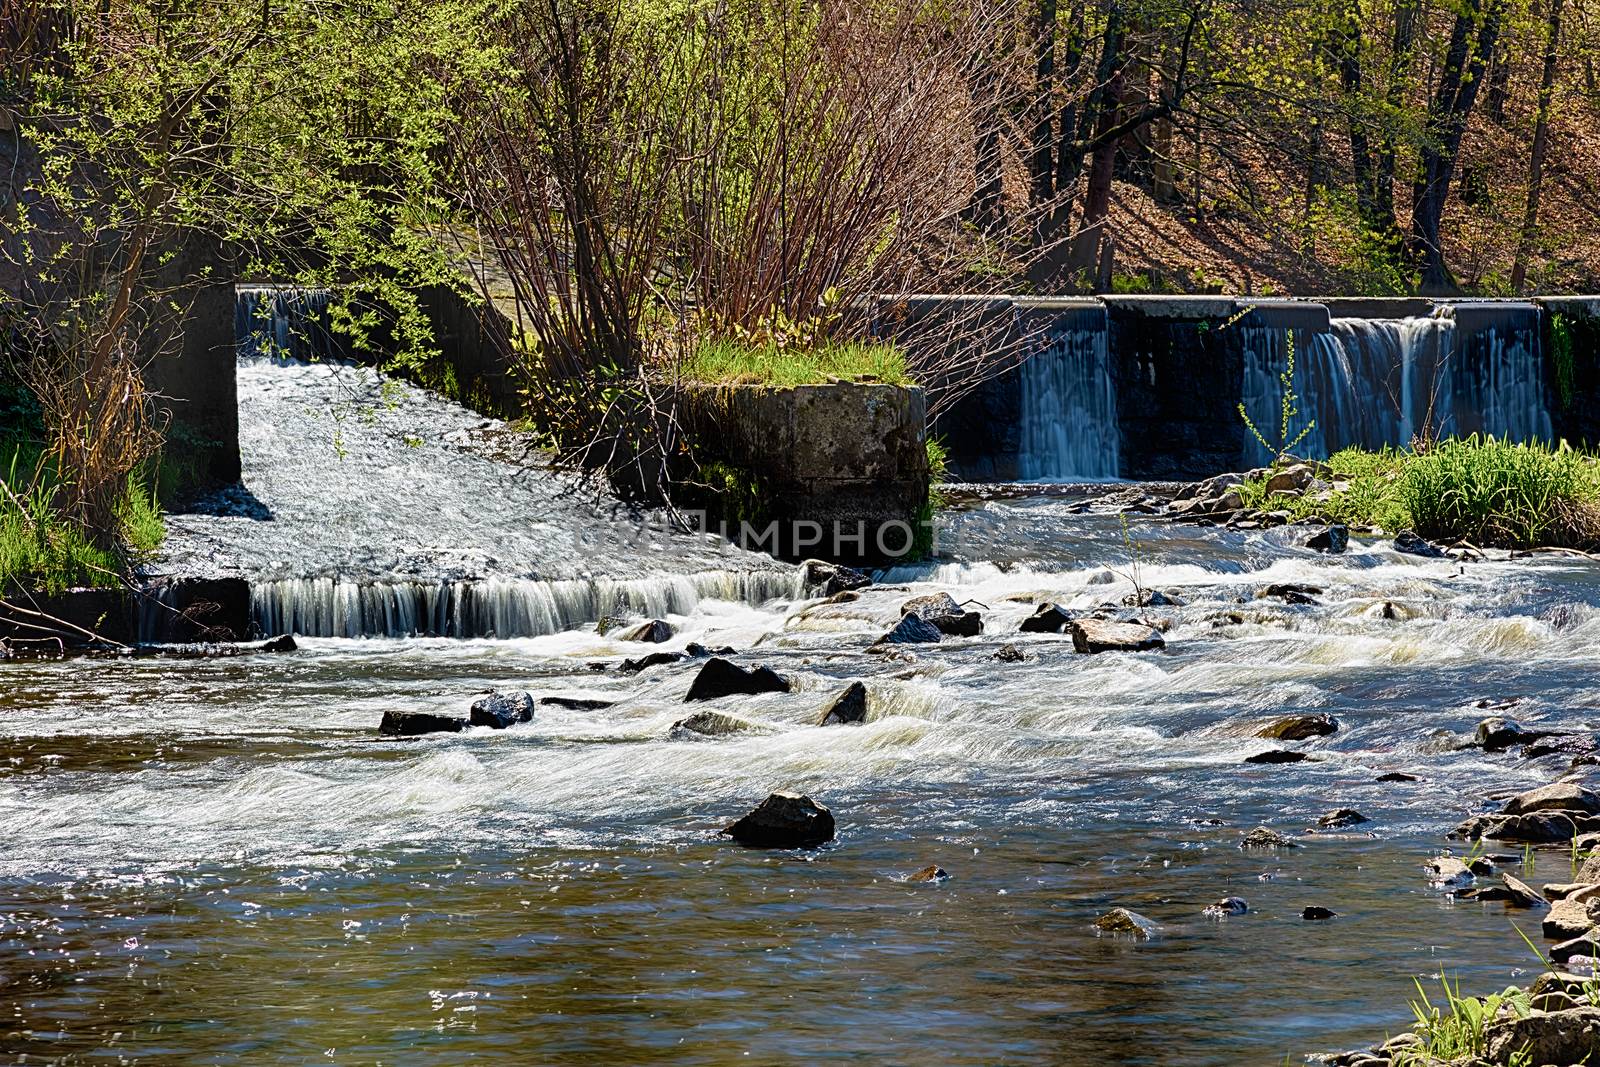 River with the weir runs over boulders